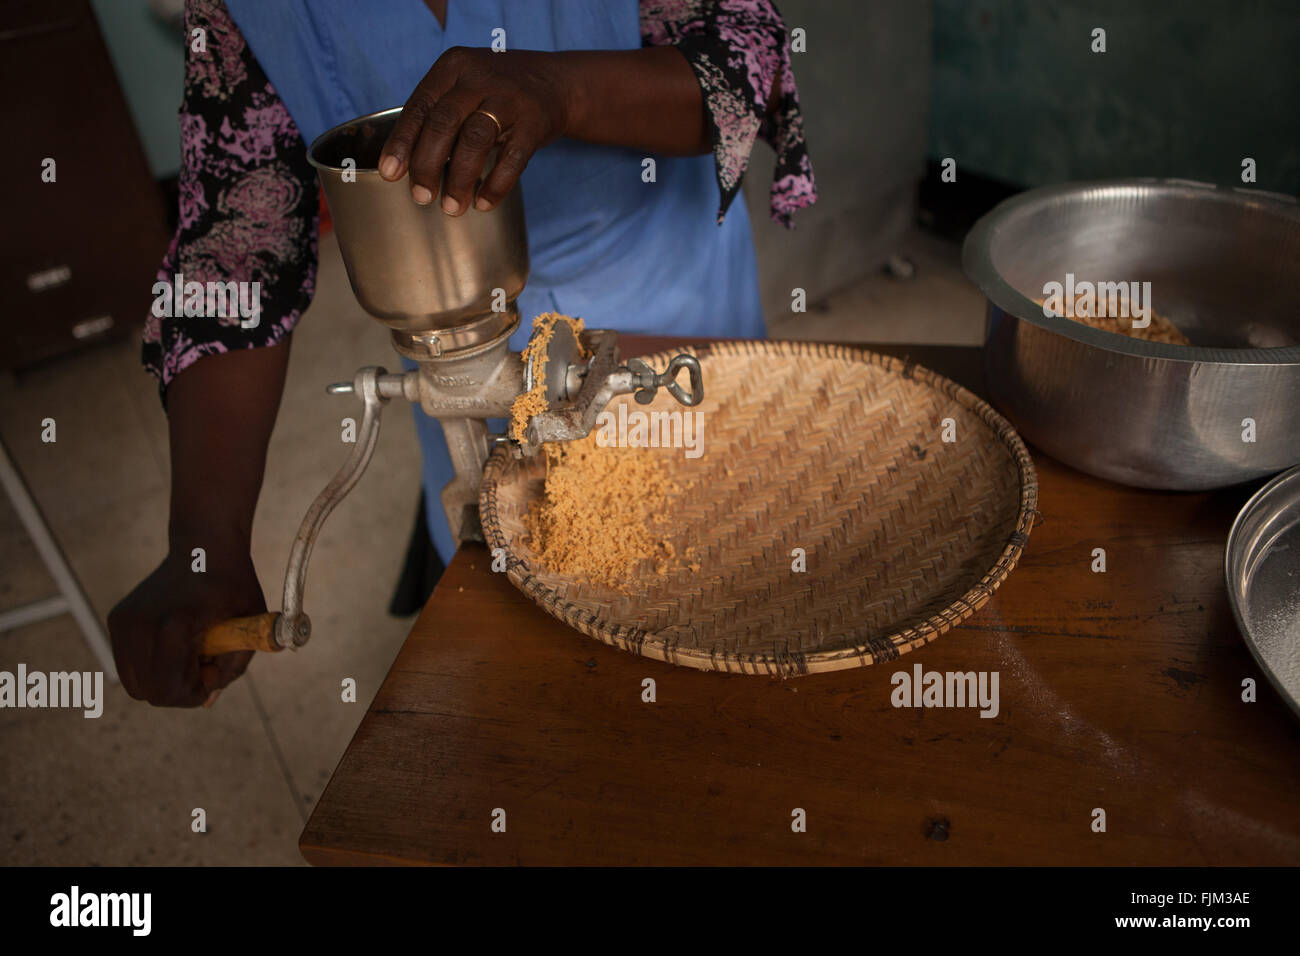 A business woman grinding peanuts to sell, Tanzania Stock Photo